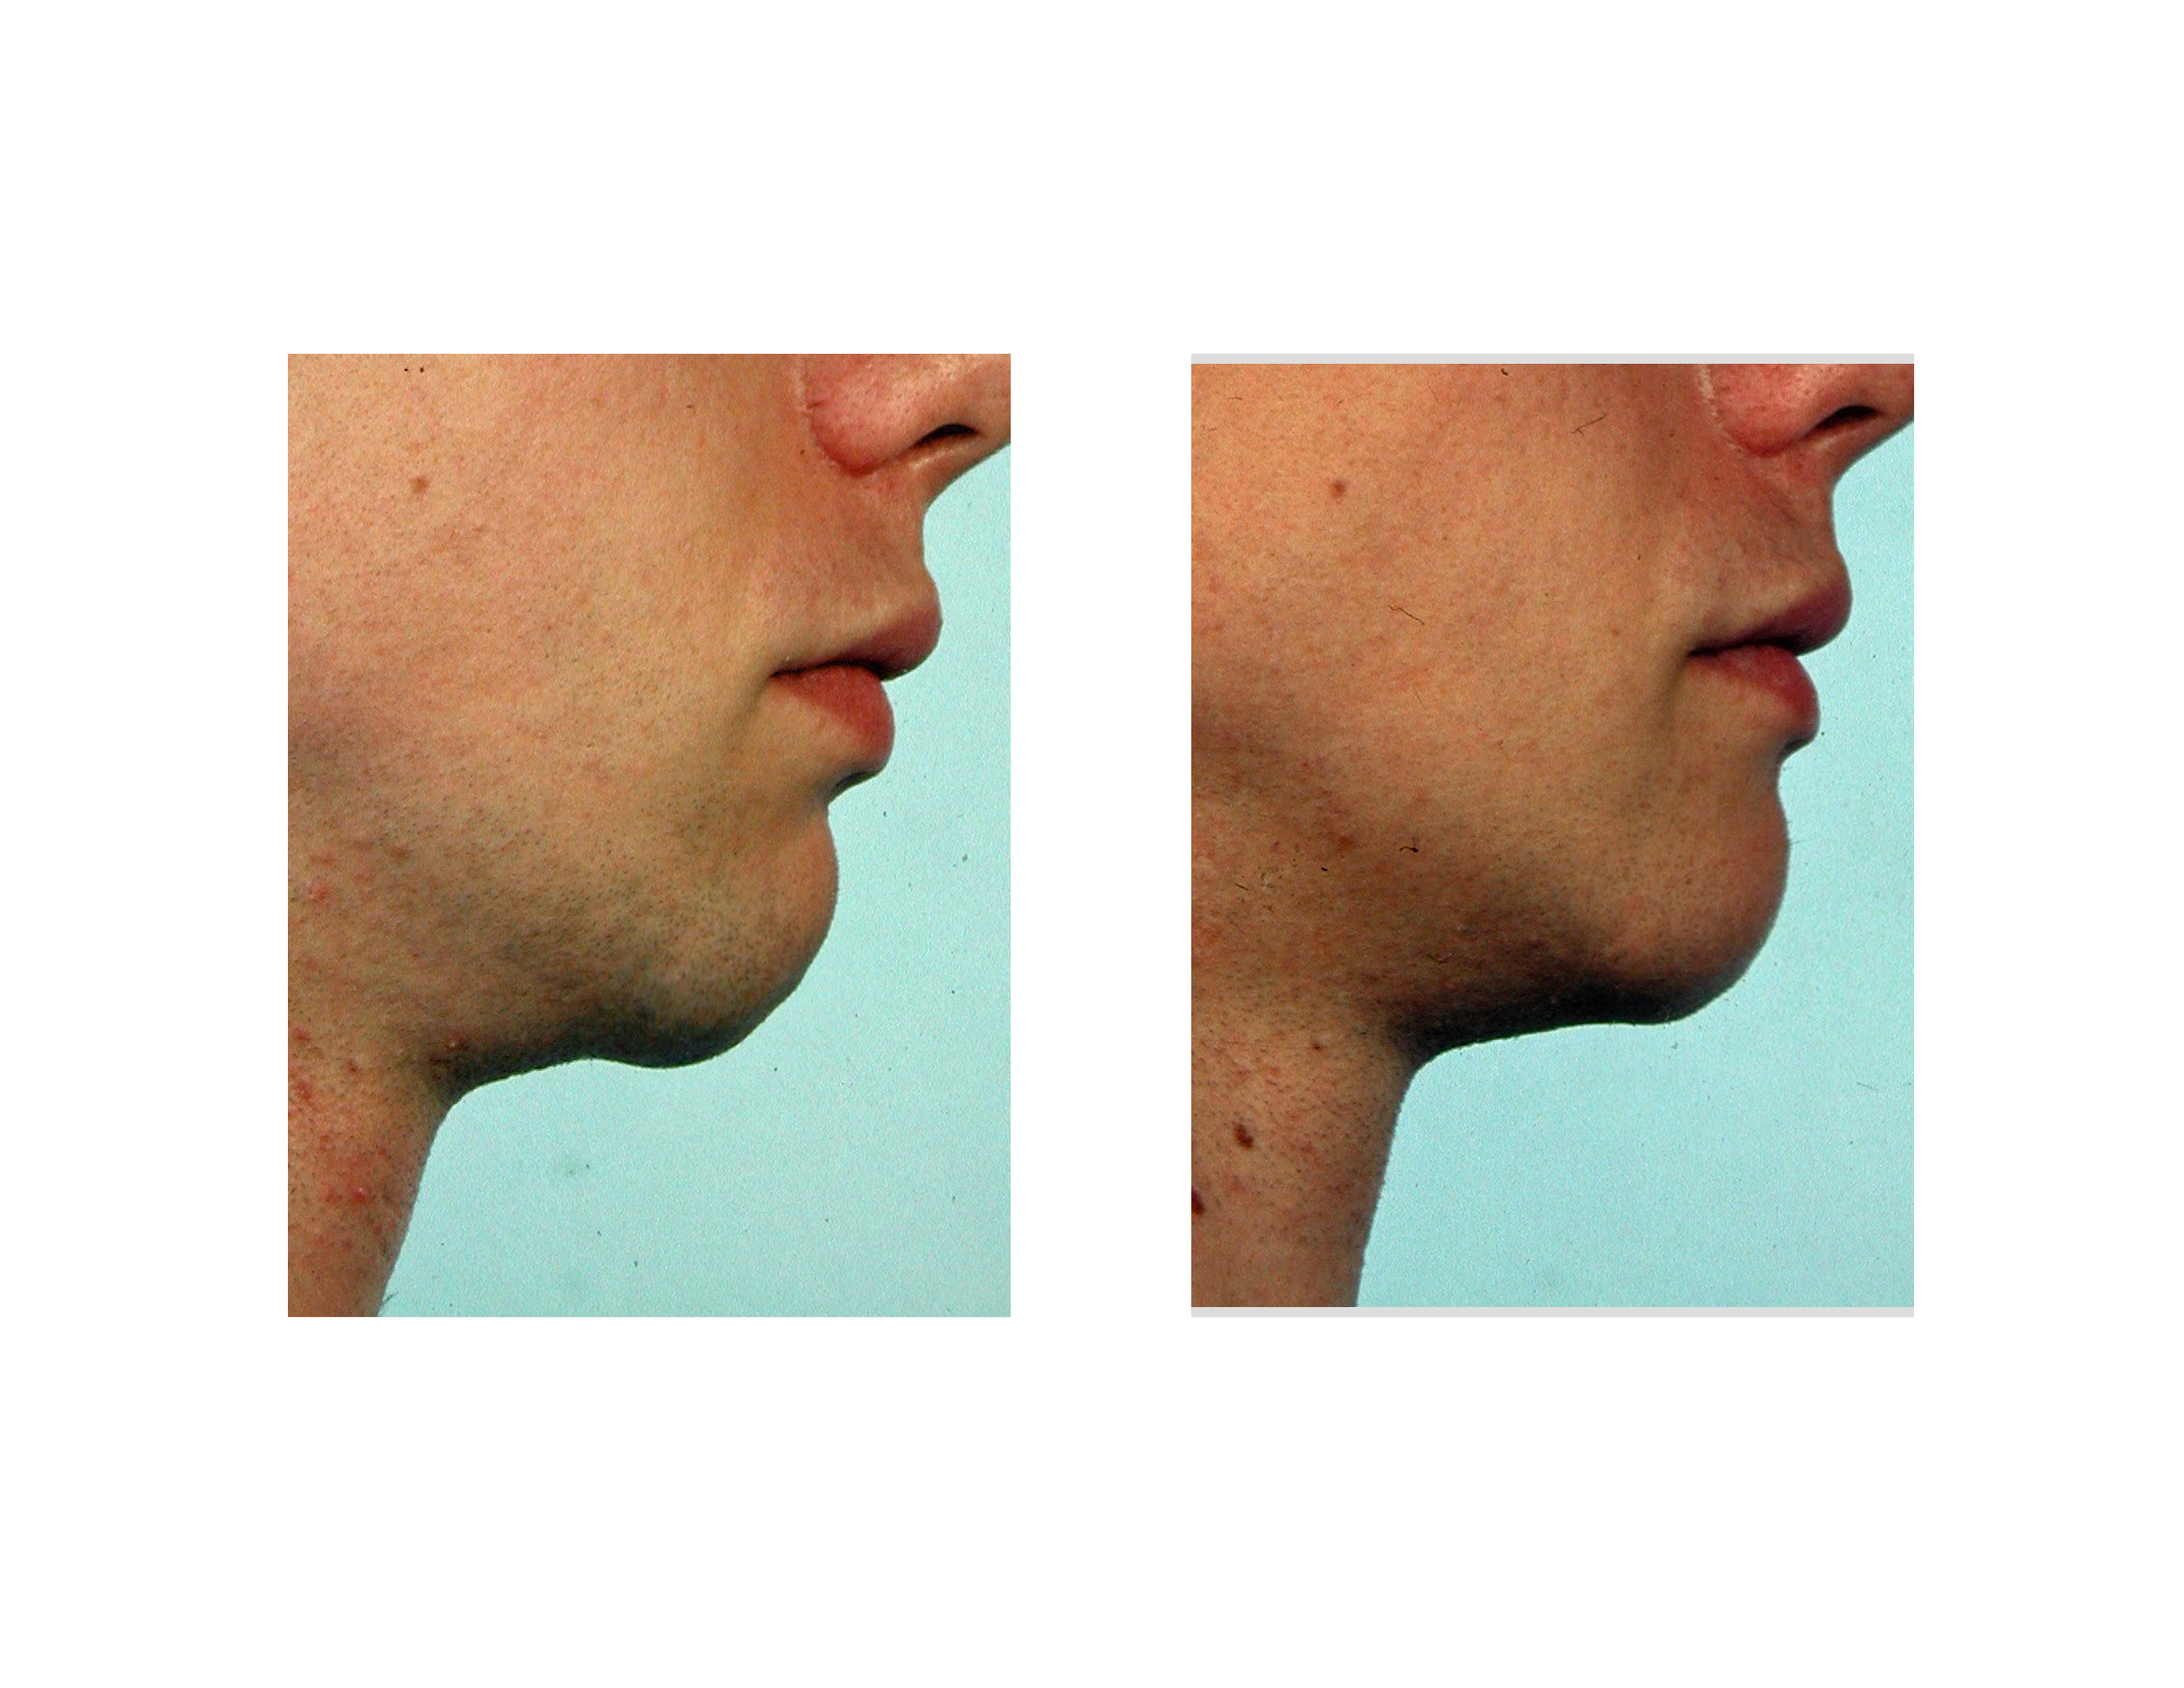 In the aged chin, in particular, the amount of chin projection is usually satisfactory. It is a matter of improving the soft tissue attachments to the bone. - correction-of-chin-sag-after-implant-removal-with-submental-tuck-up-and-new-small-implant